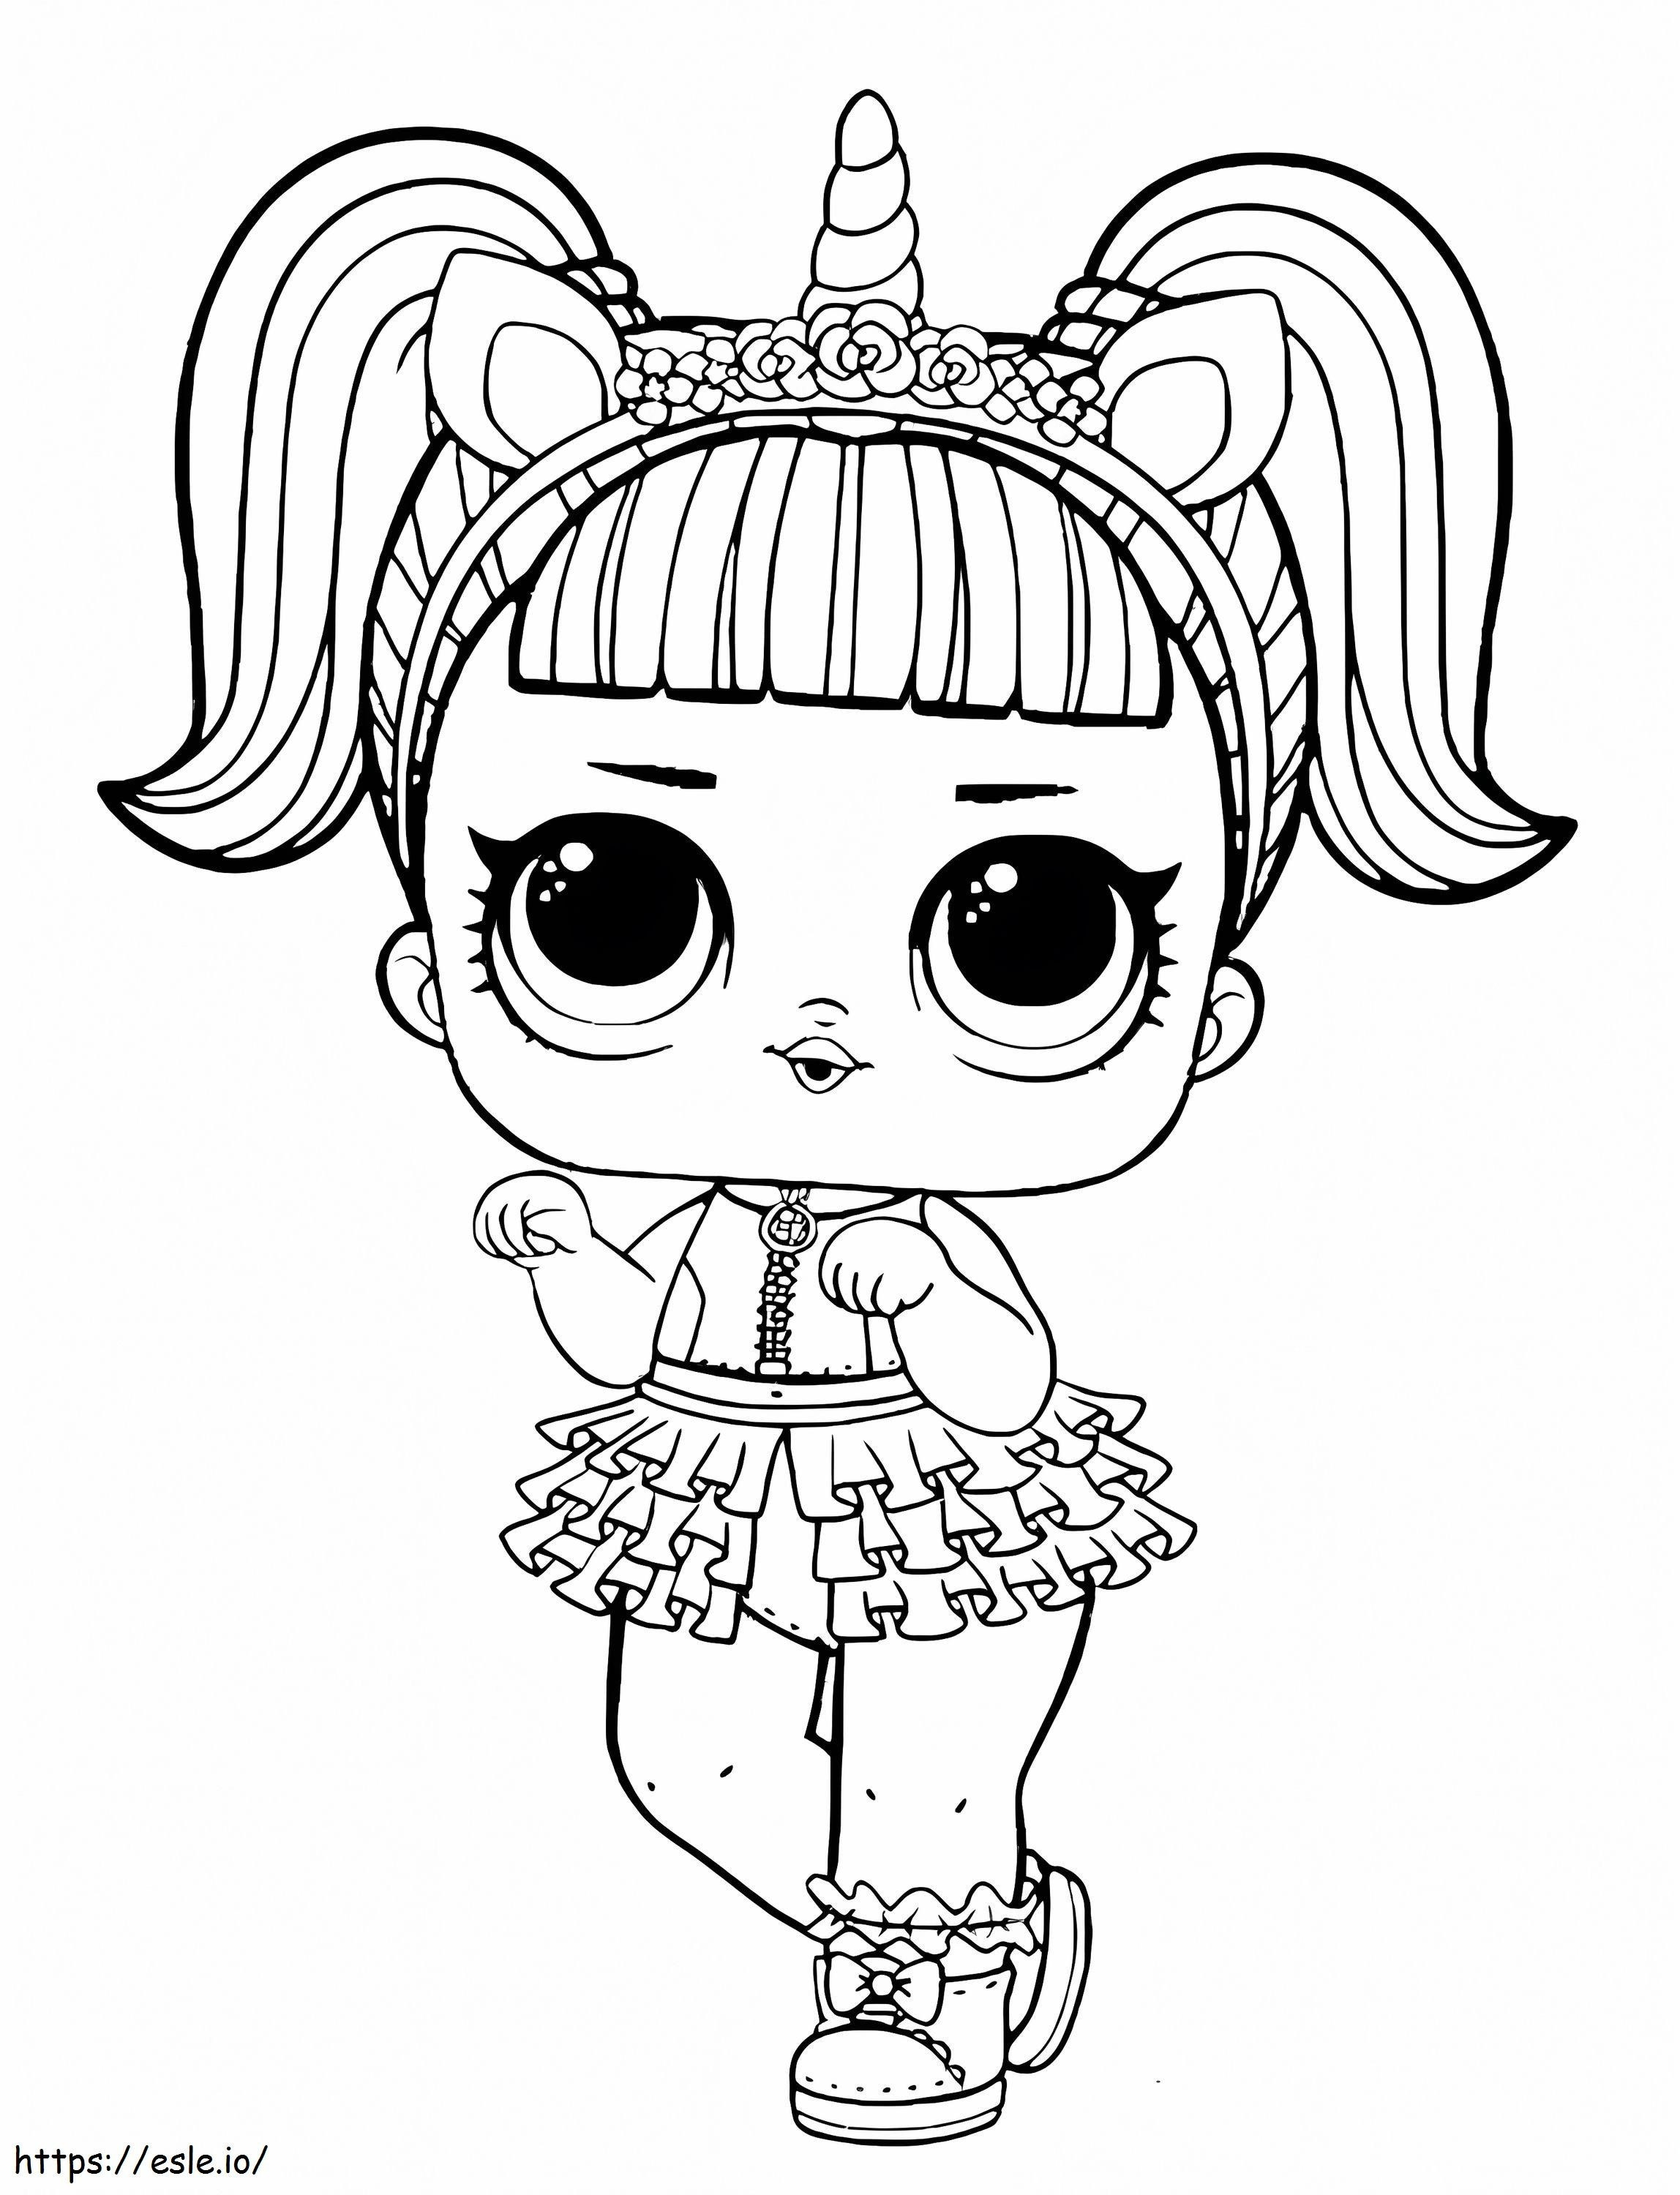 1572223437 60Ade19Be9C54Fadcc97A391996559B0 coloring page